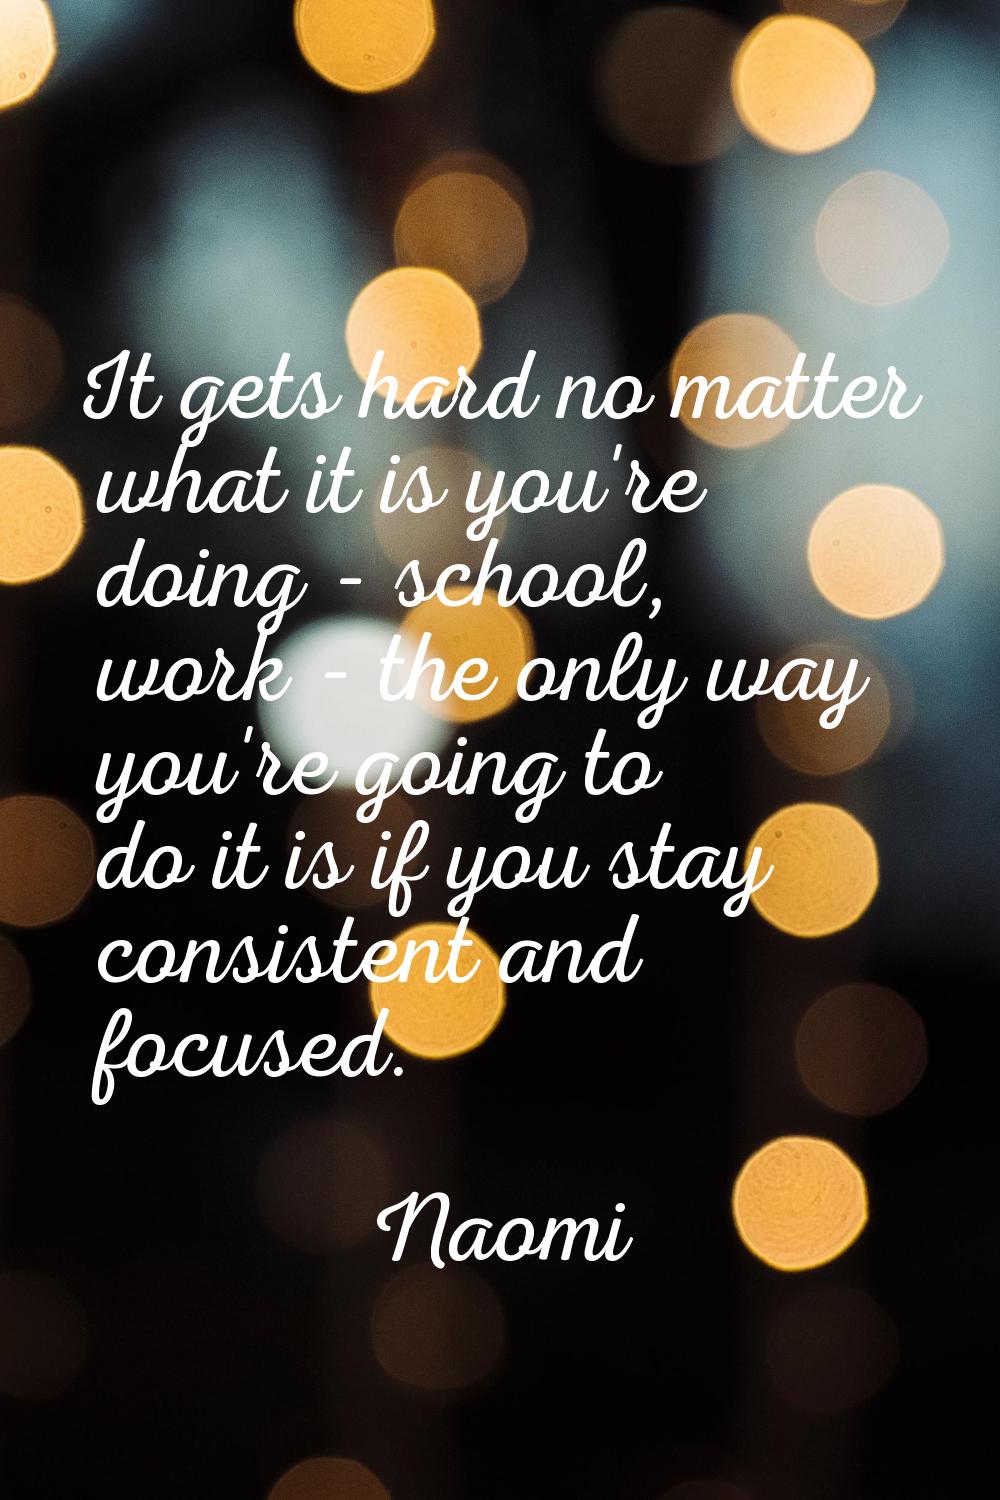 It gets hard no matter what it is you're doing - school, work - the only way you're going to do it 